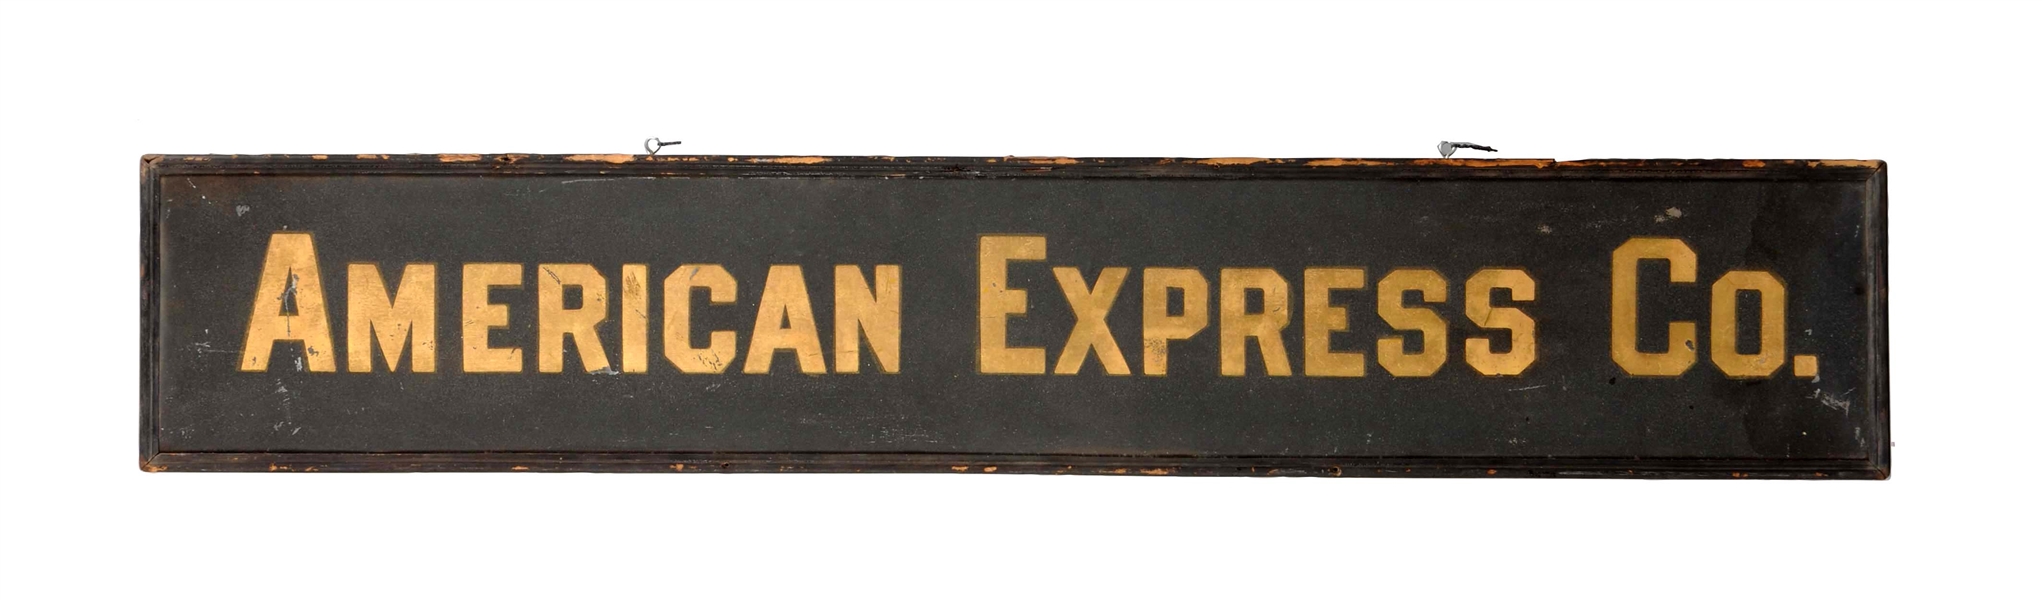 AMERICAN EXPRESS CO. WOODEN ADVERTISING TRADE SIGN.